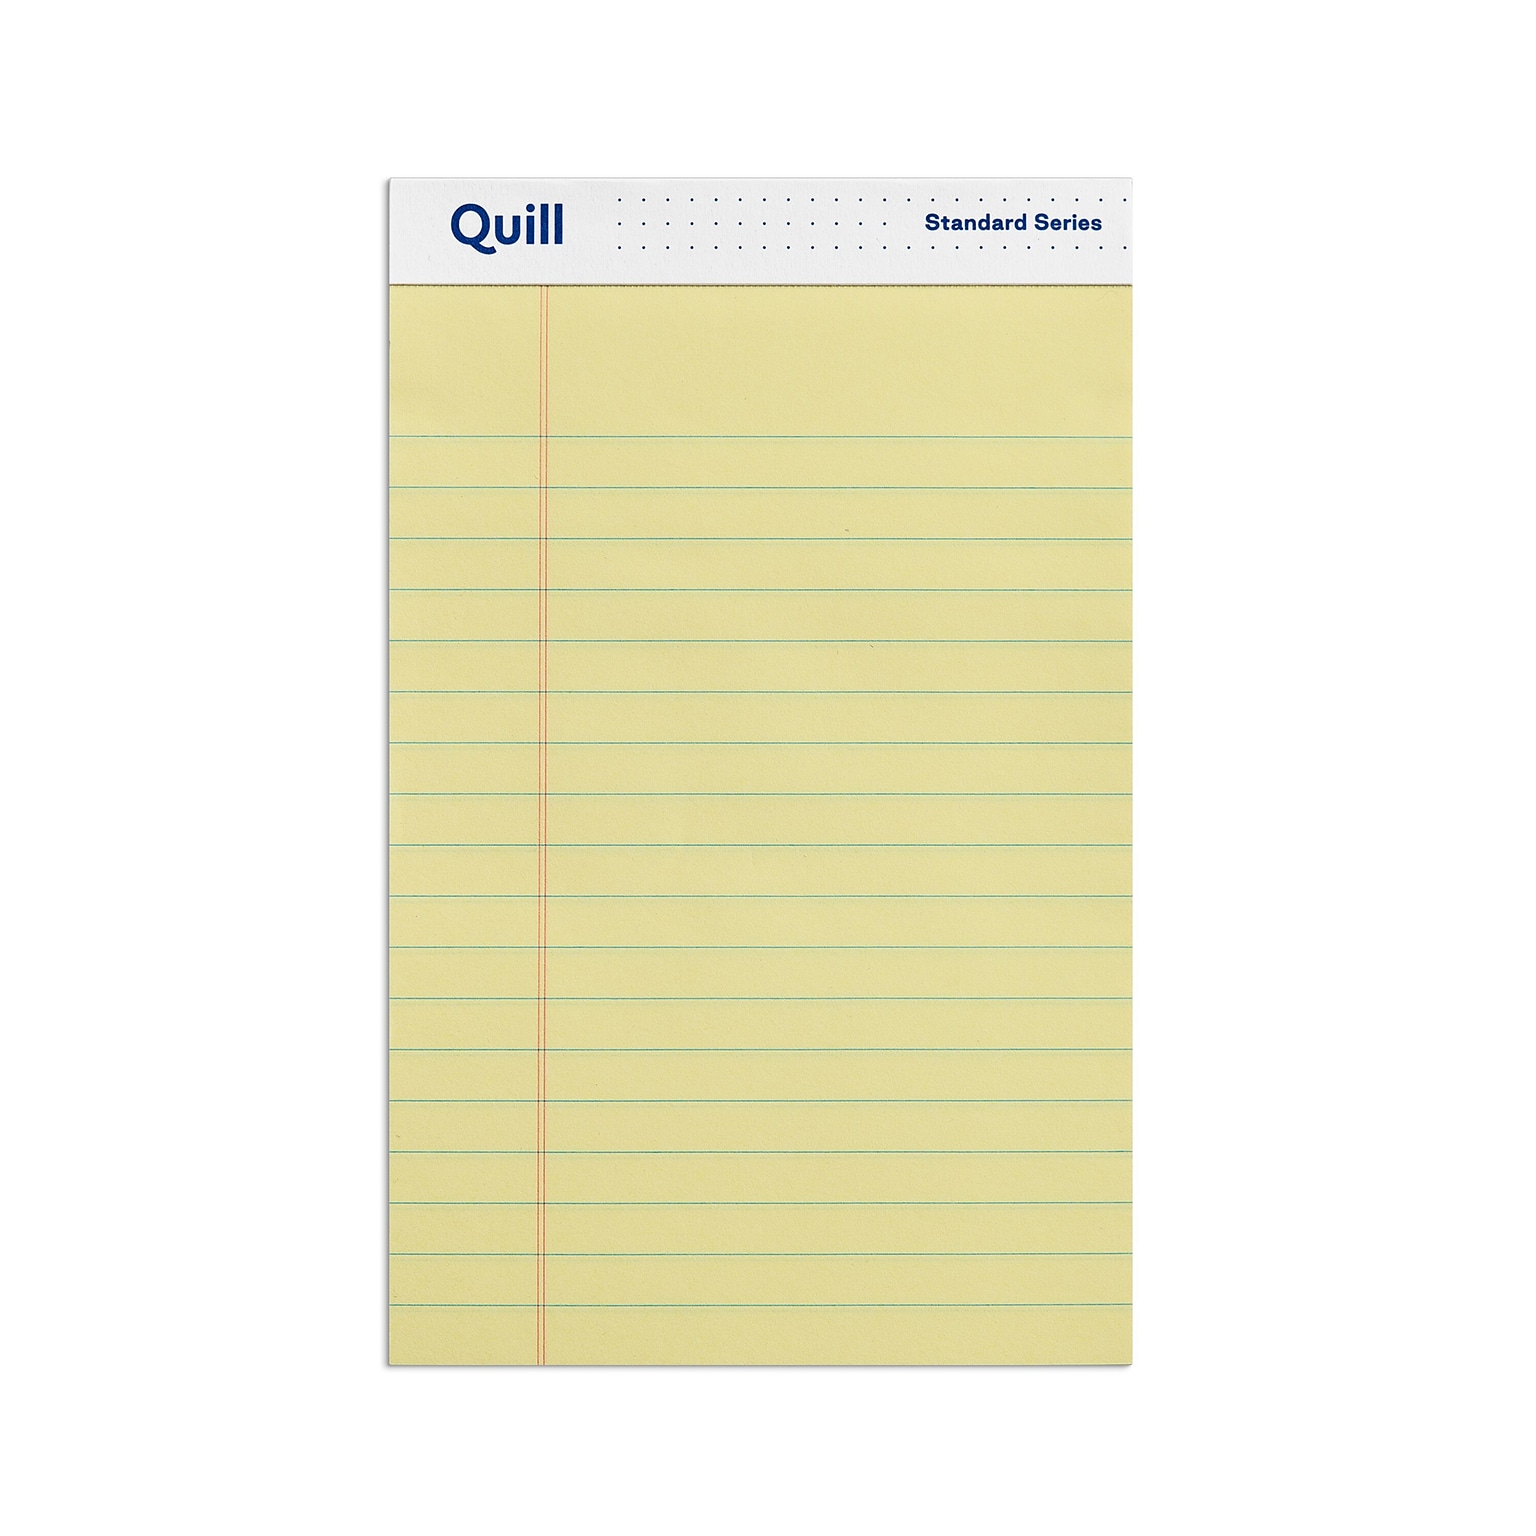 Quill Brand® Standard Series Legal Pad, 5 x 8, Wide Ruled, Canary Yellow, 50 Sheets/Pad, 12 Pads/Pack (742332)